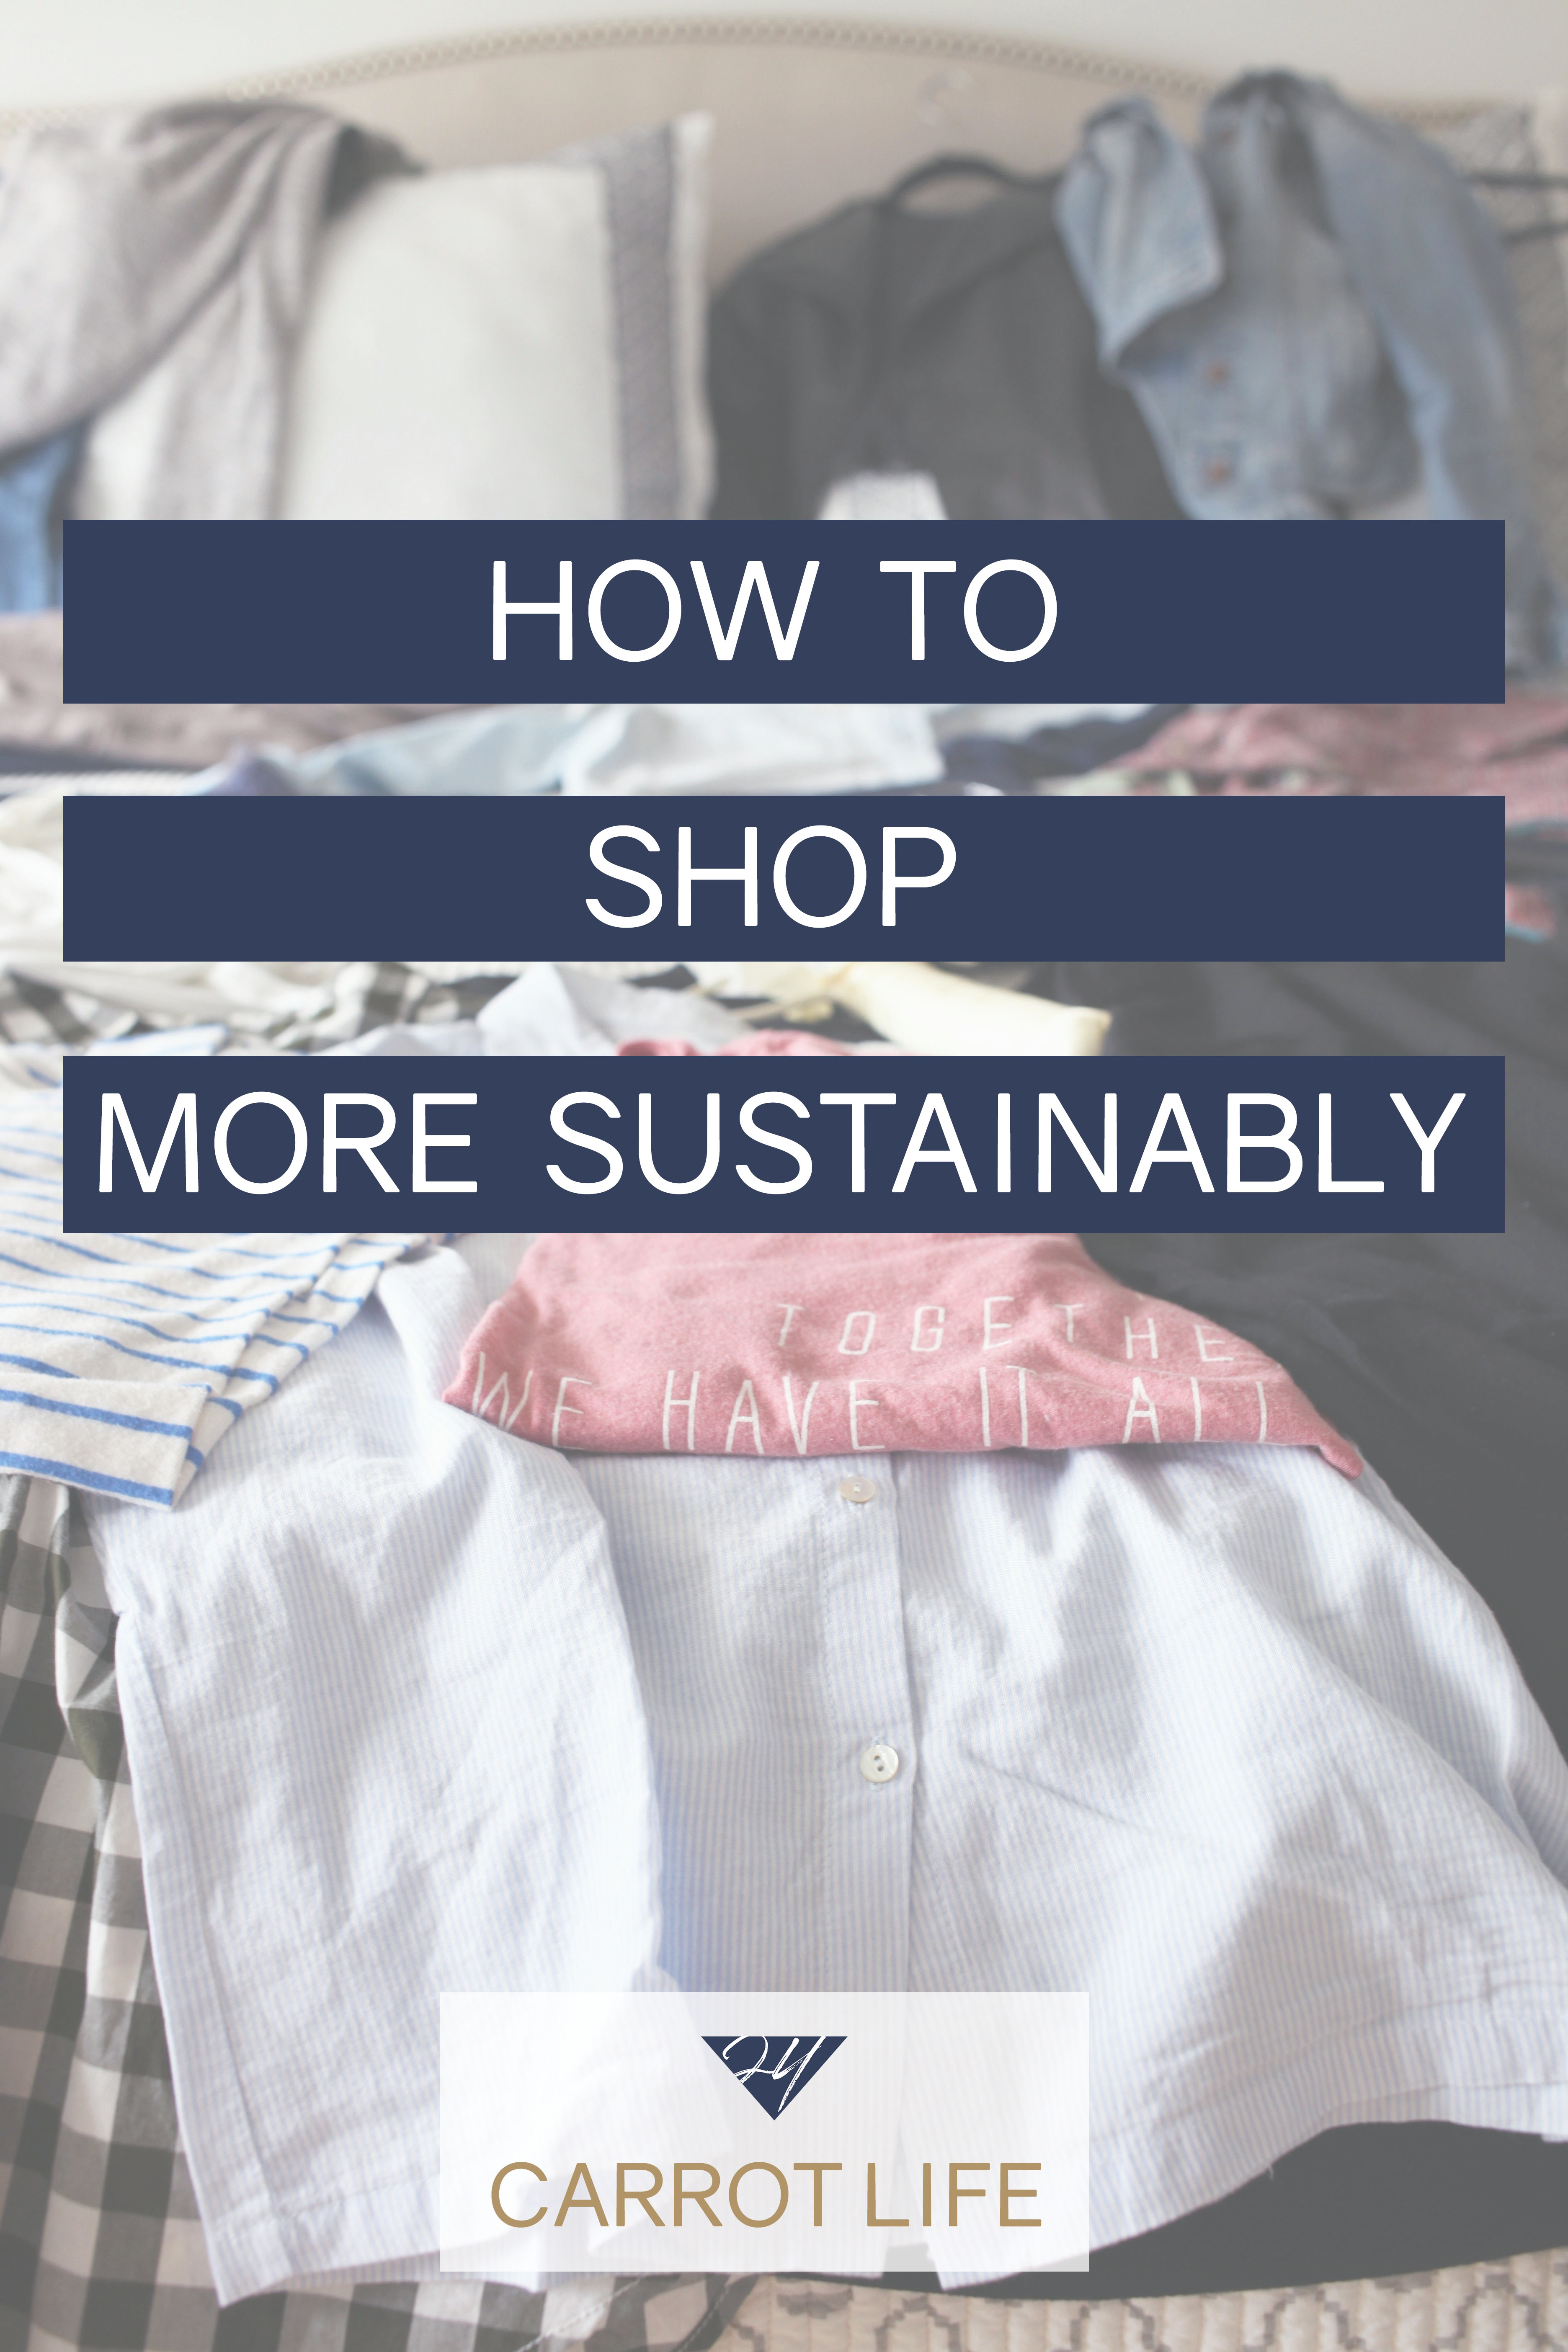 How to Shop Sustainably & Ethically // 24 Carrot Life